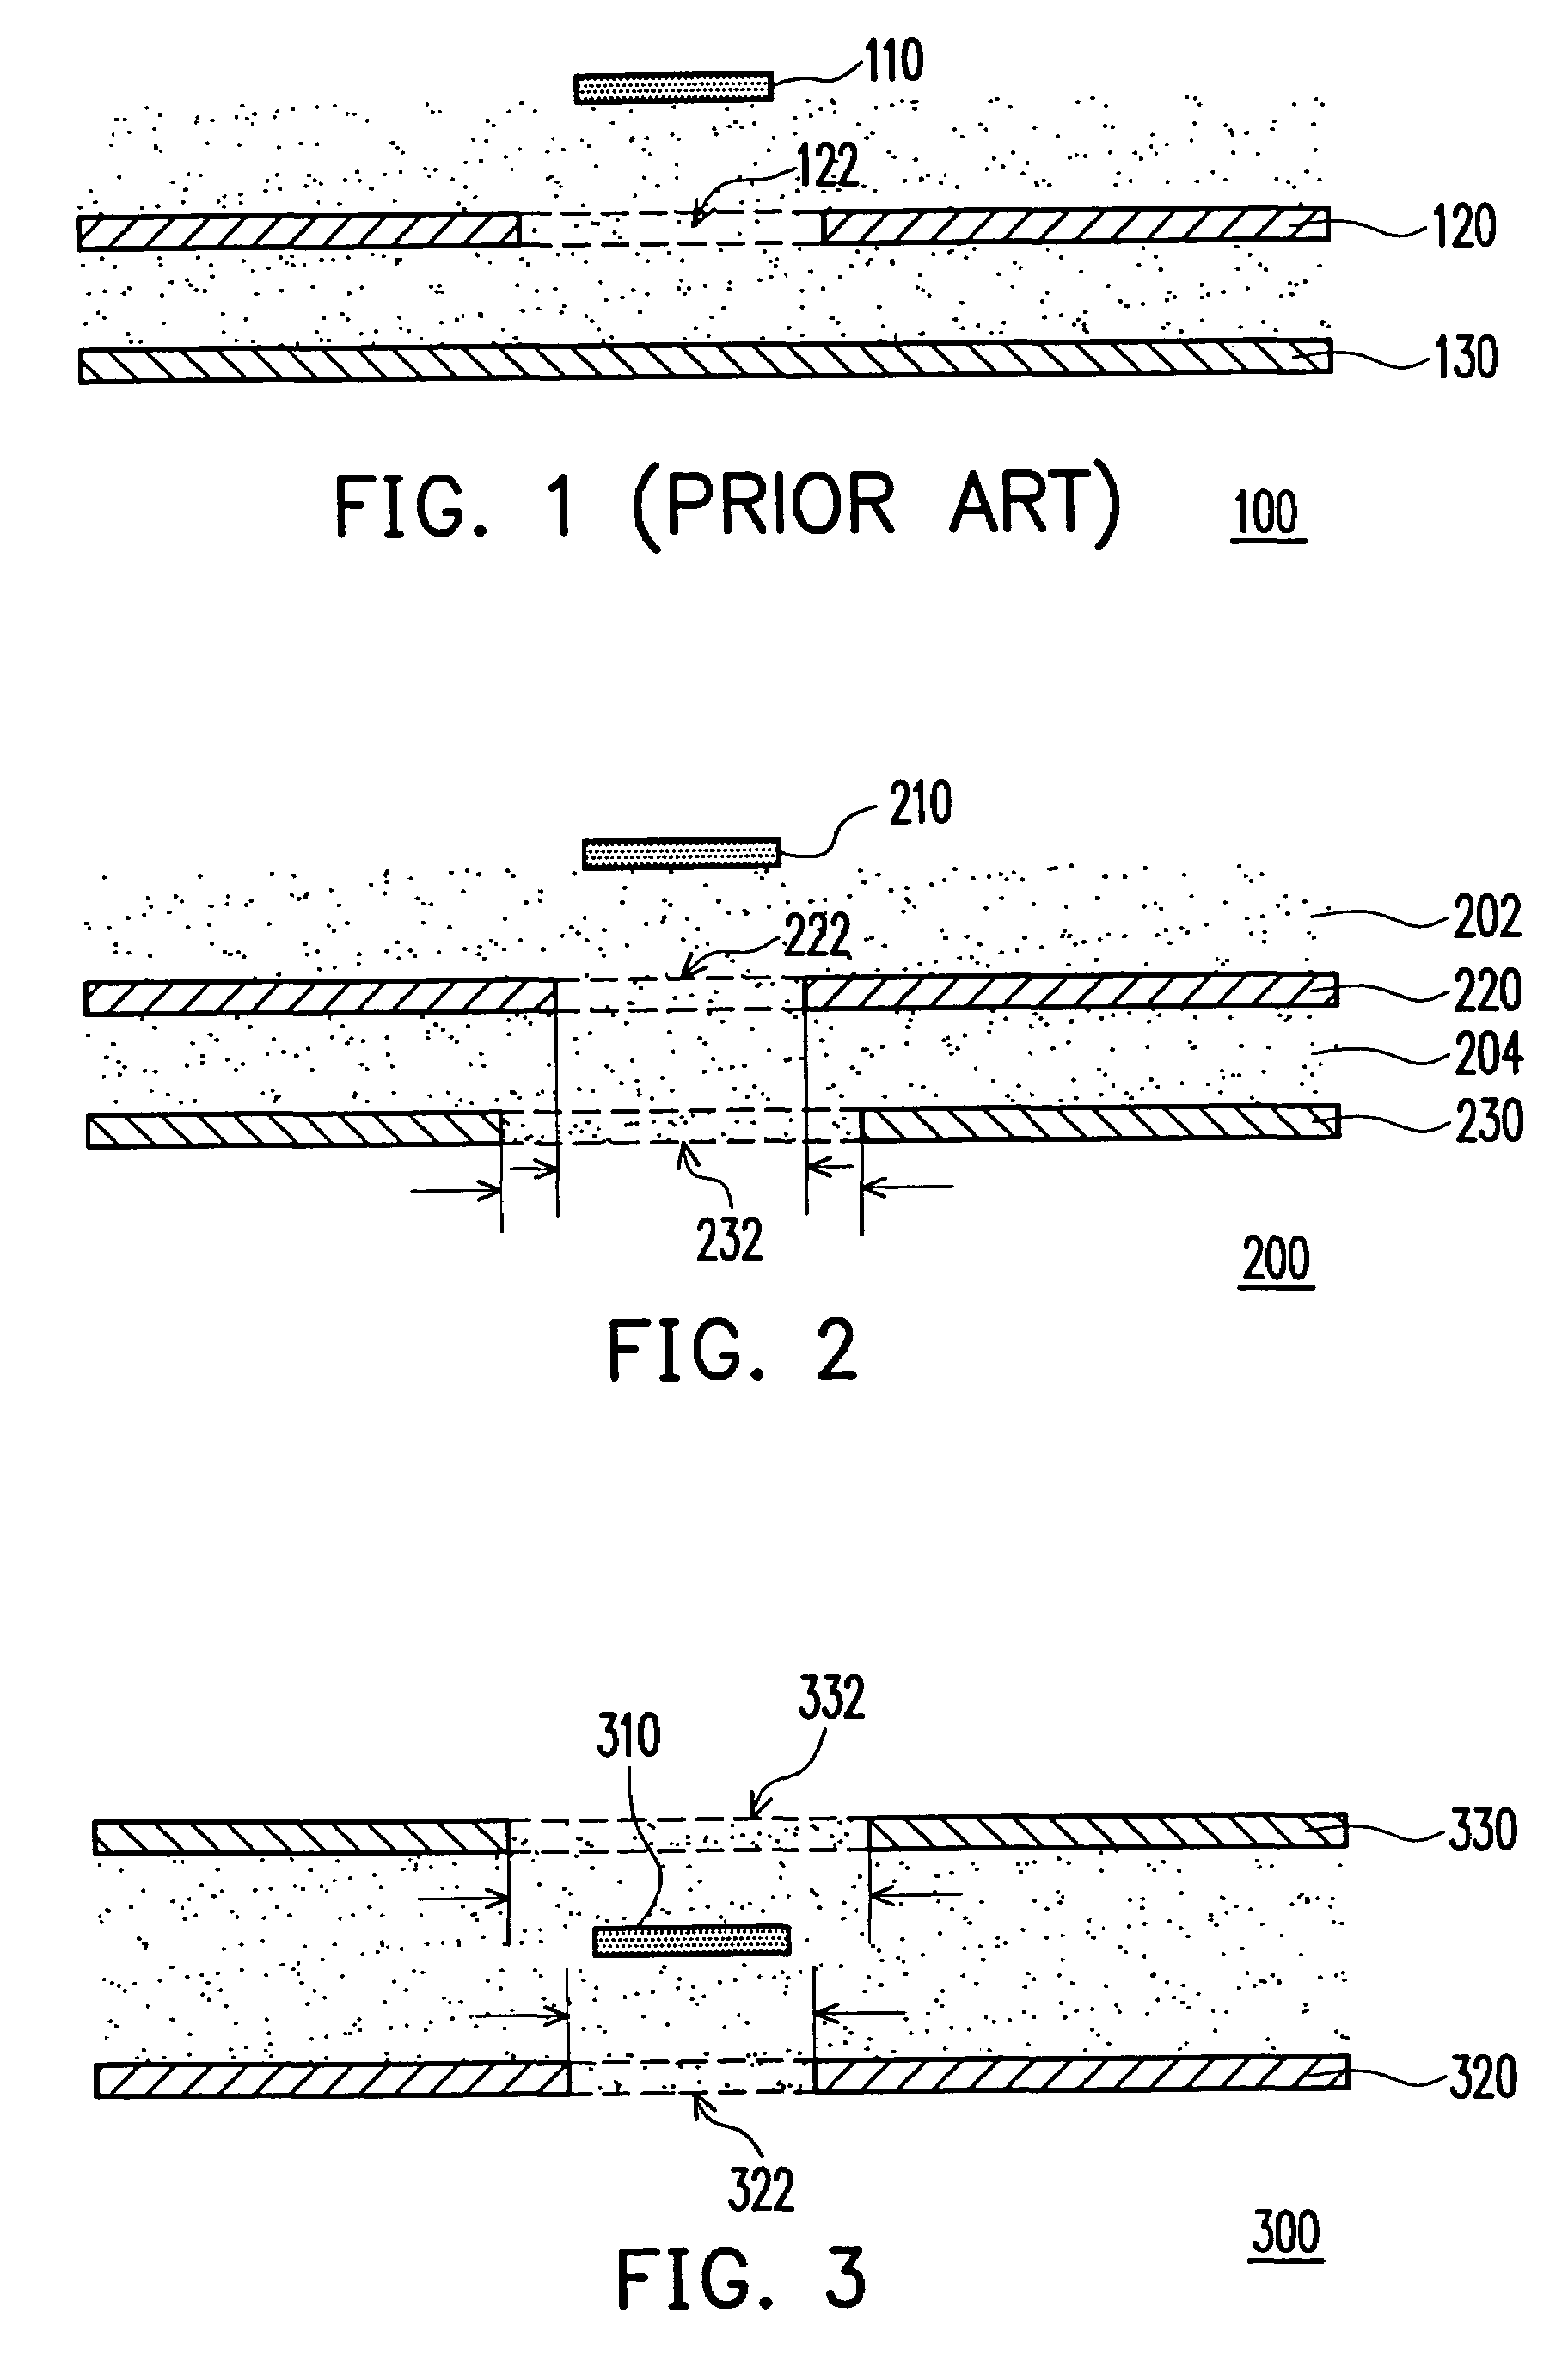 Signal transmission structure having plural reference planes with non-overlapping openings